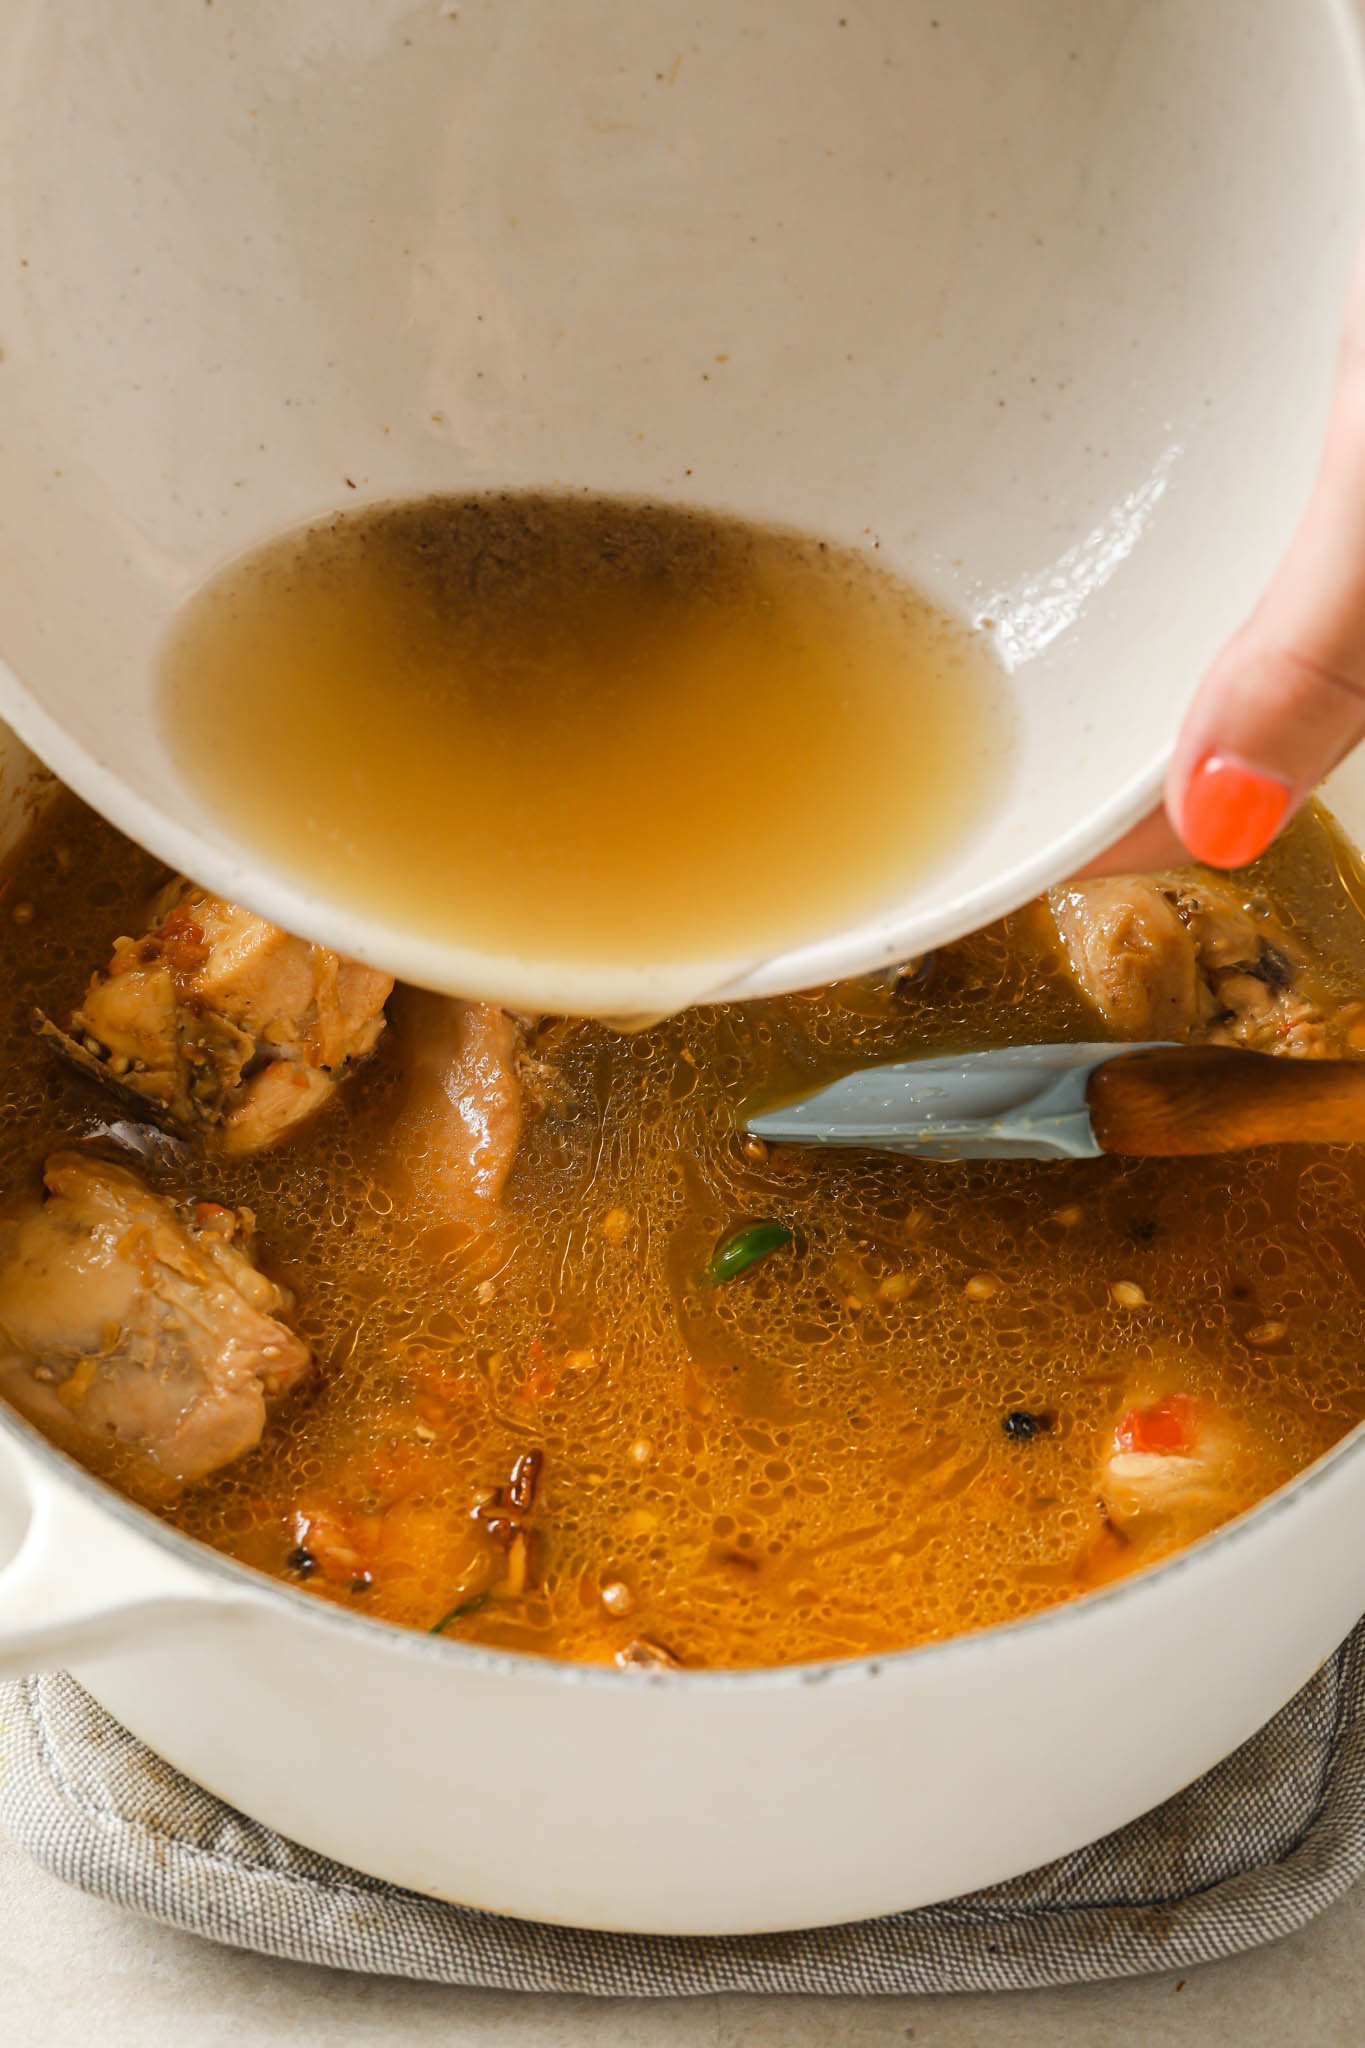 Adding broth to cooked chicken.